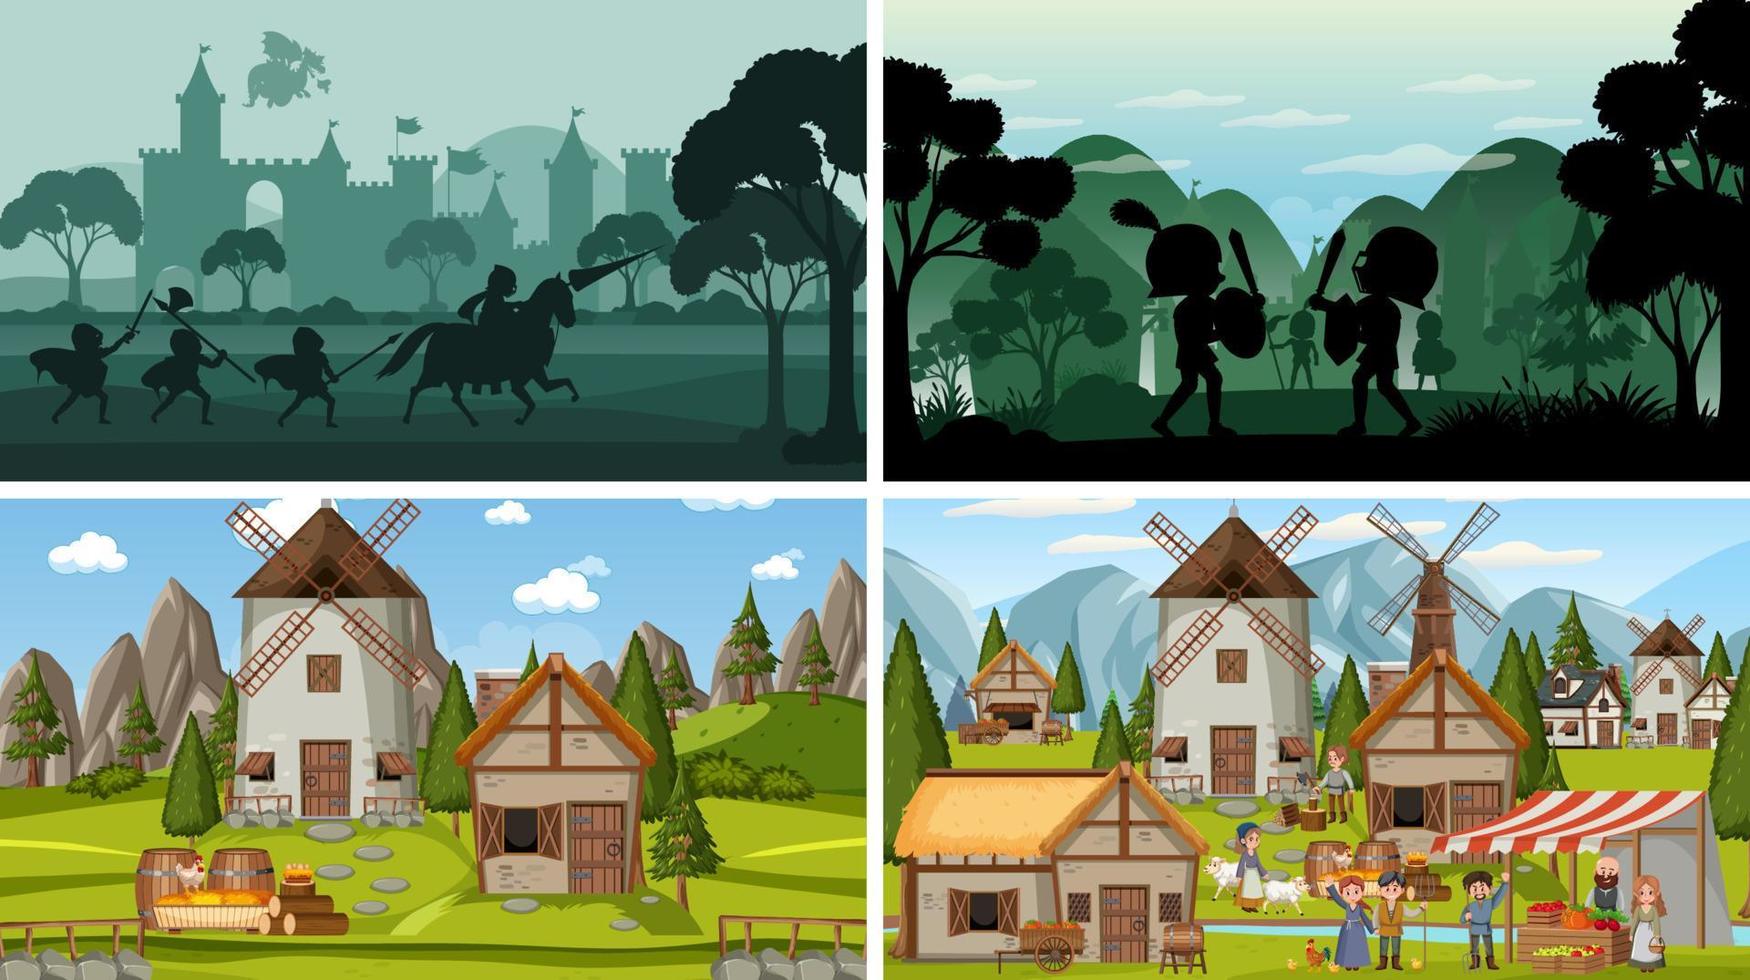 Set of different scene medieval with silhouette vector